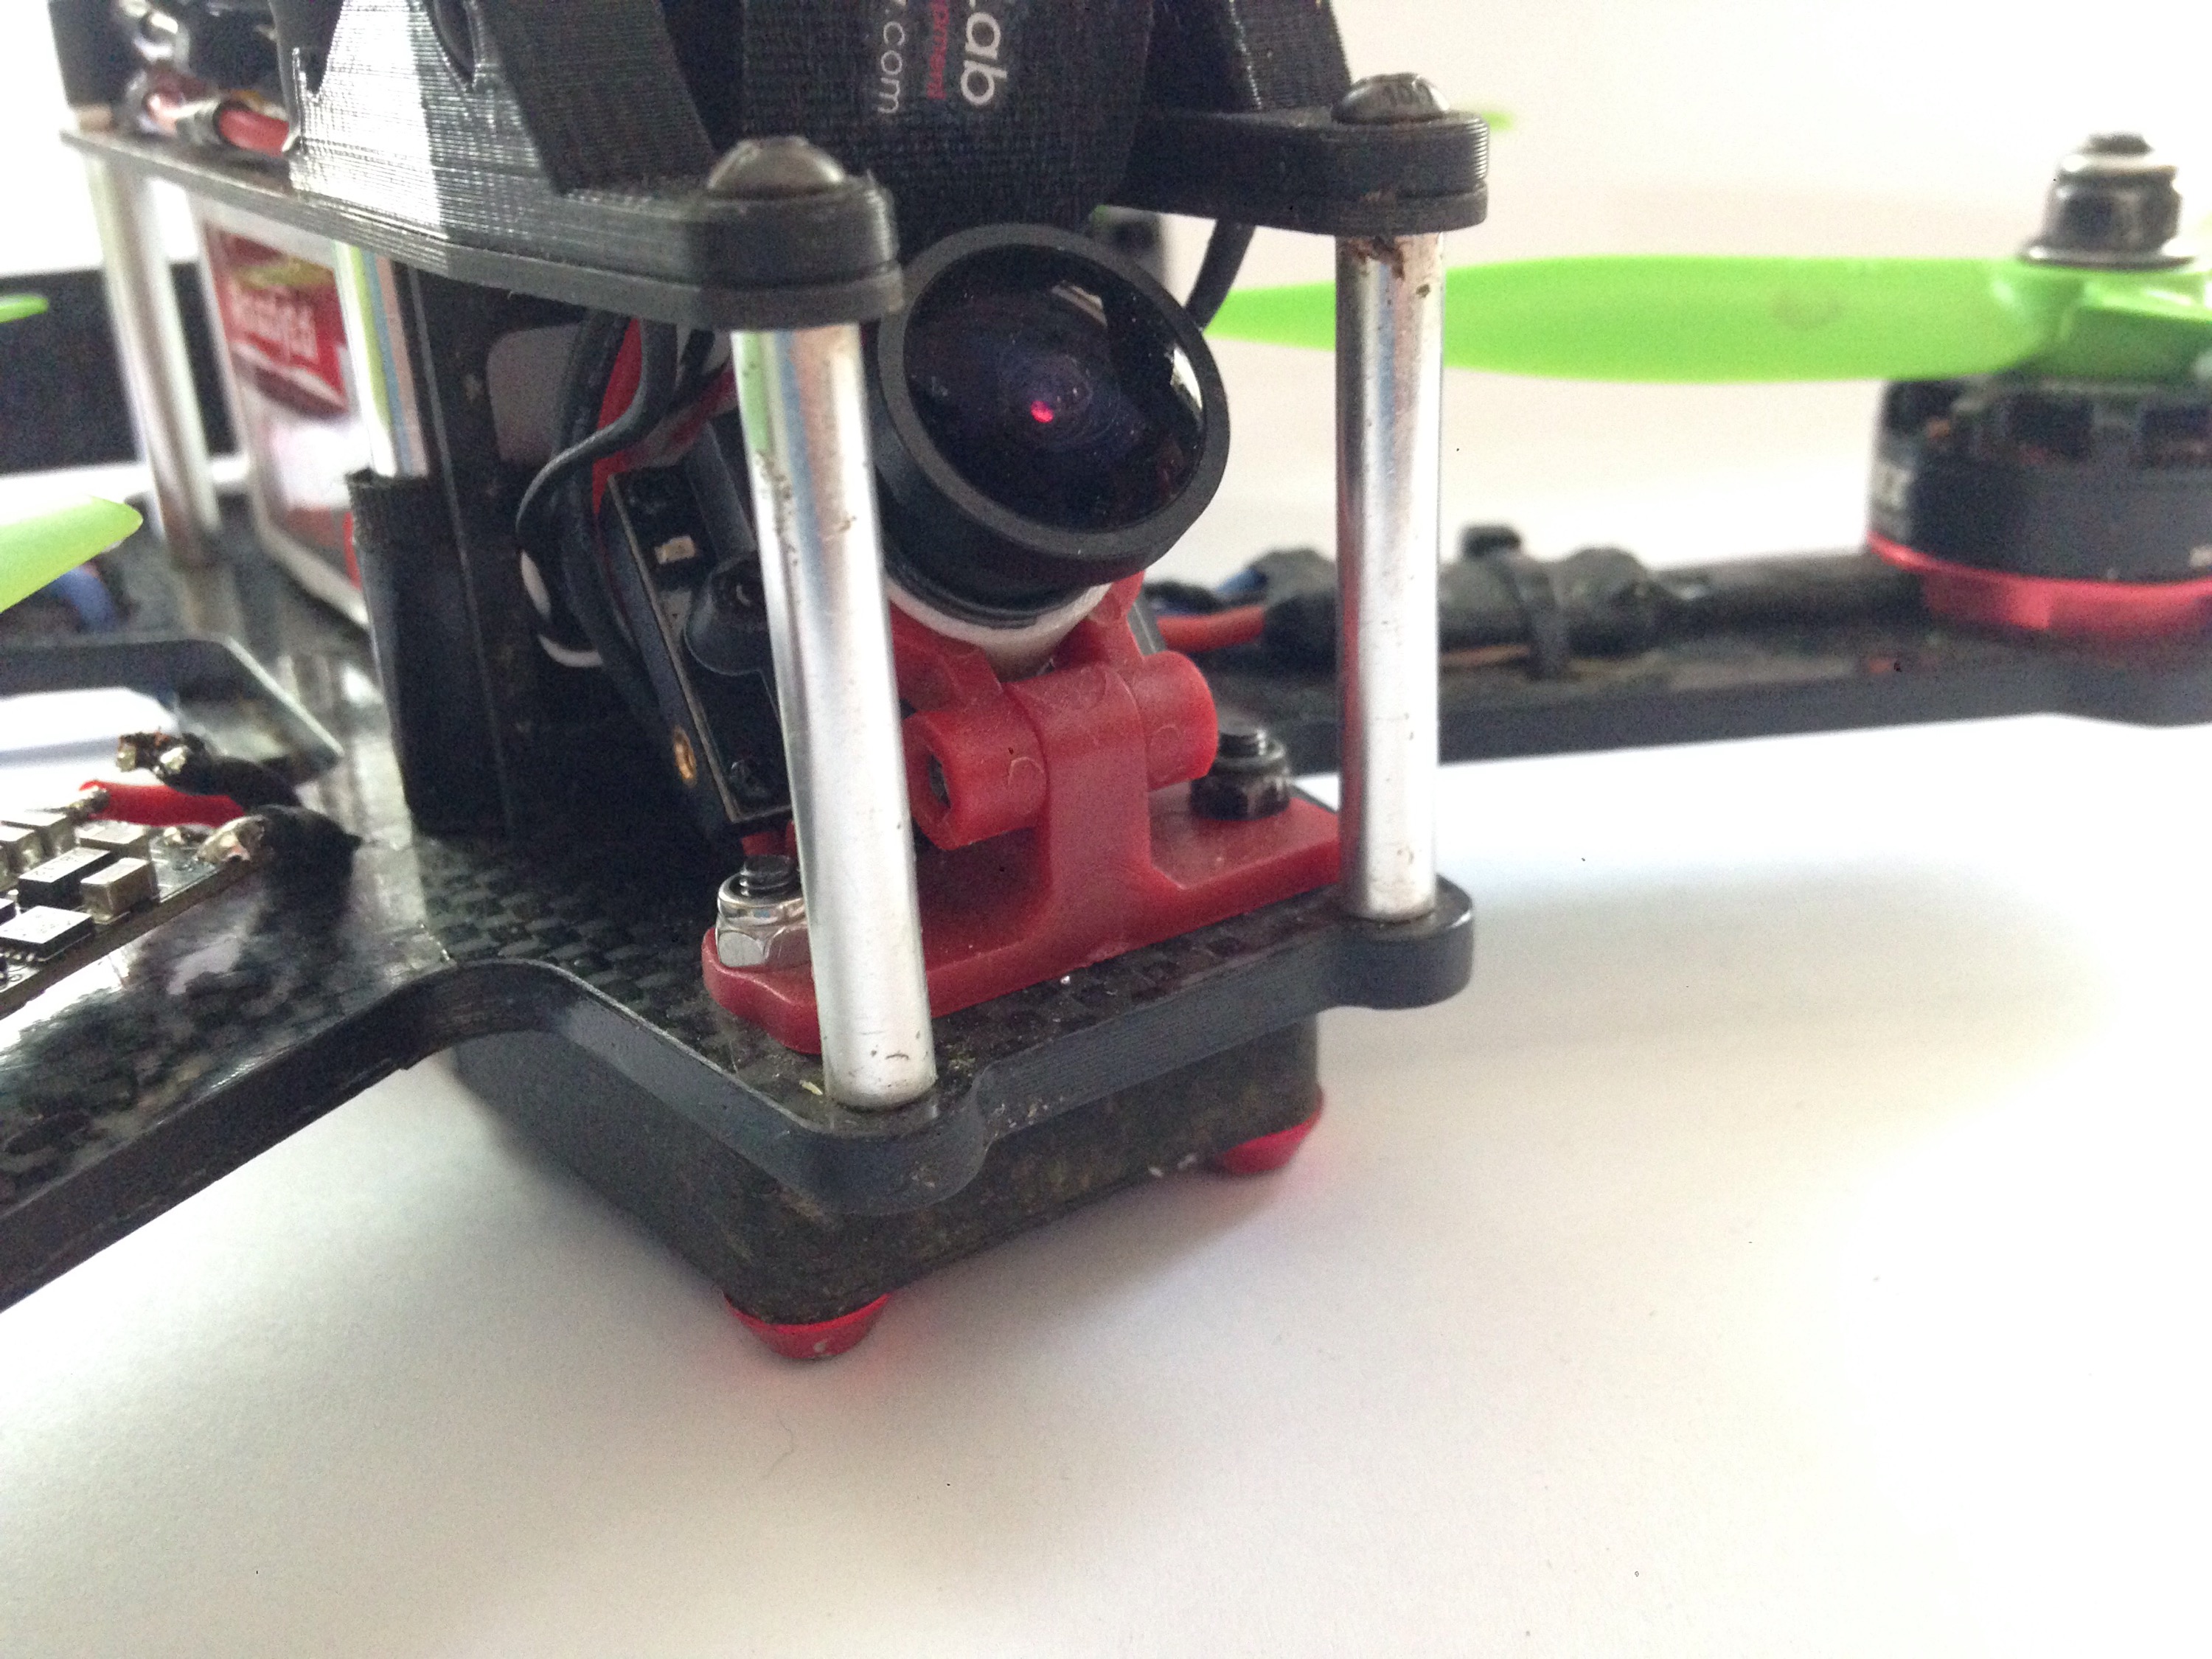 Adding tilt to your FPV camera by pushing it upwards